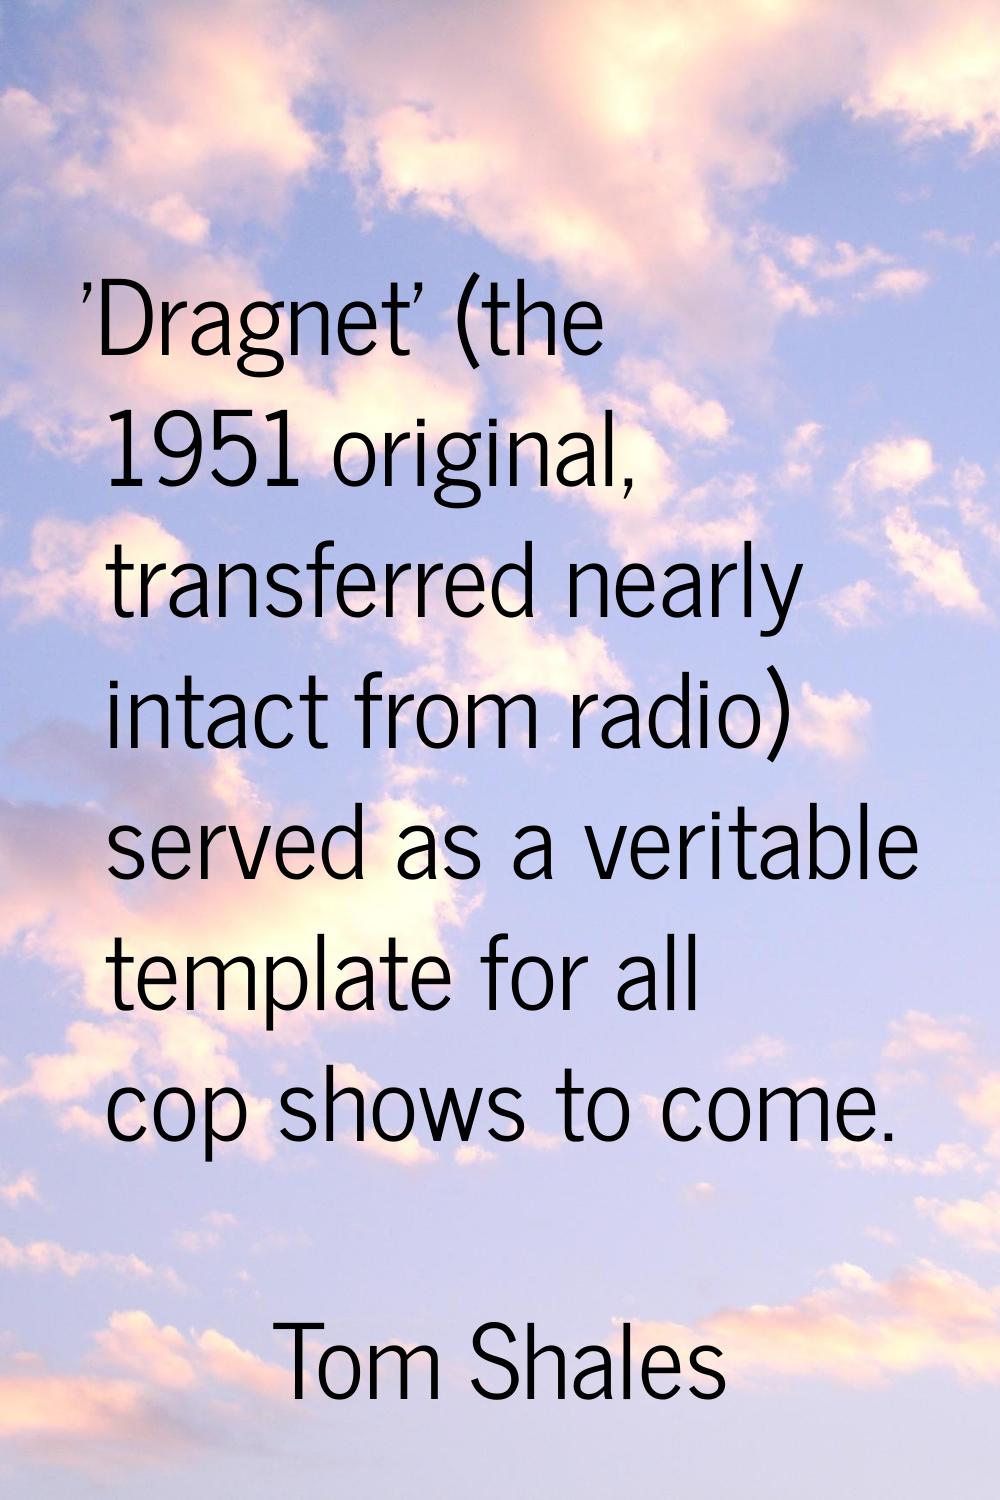 'Dragnet' (the 1951 original, transferred nearly intact from radio) served as a veritable template 